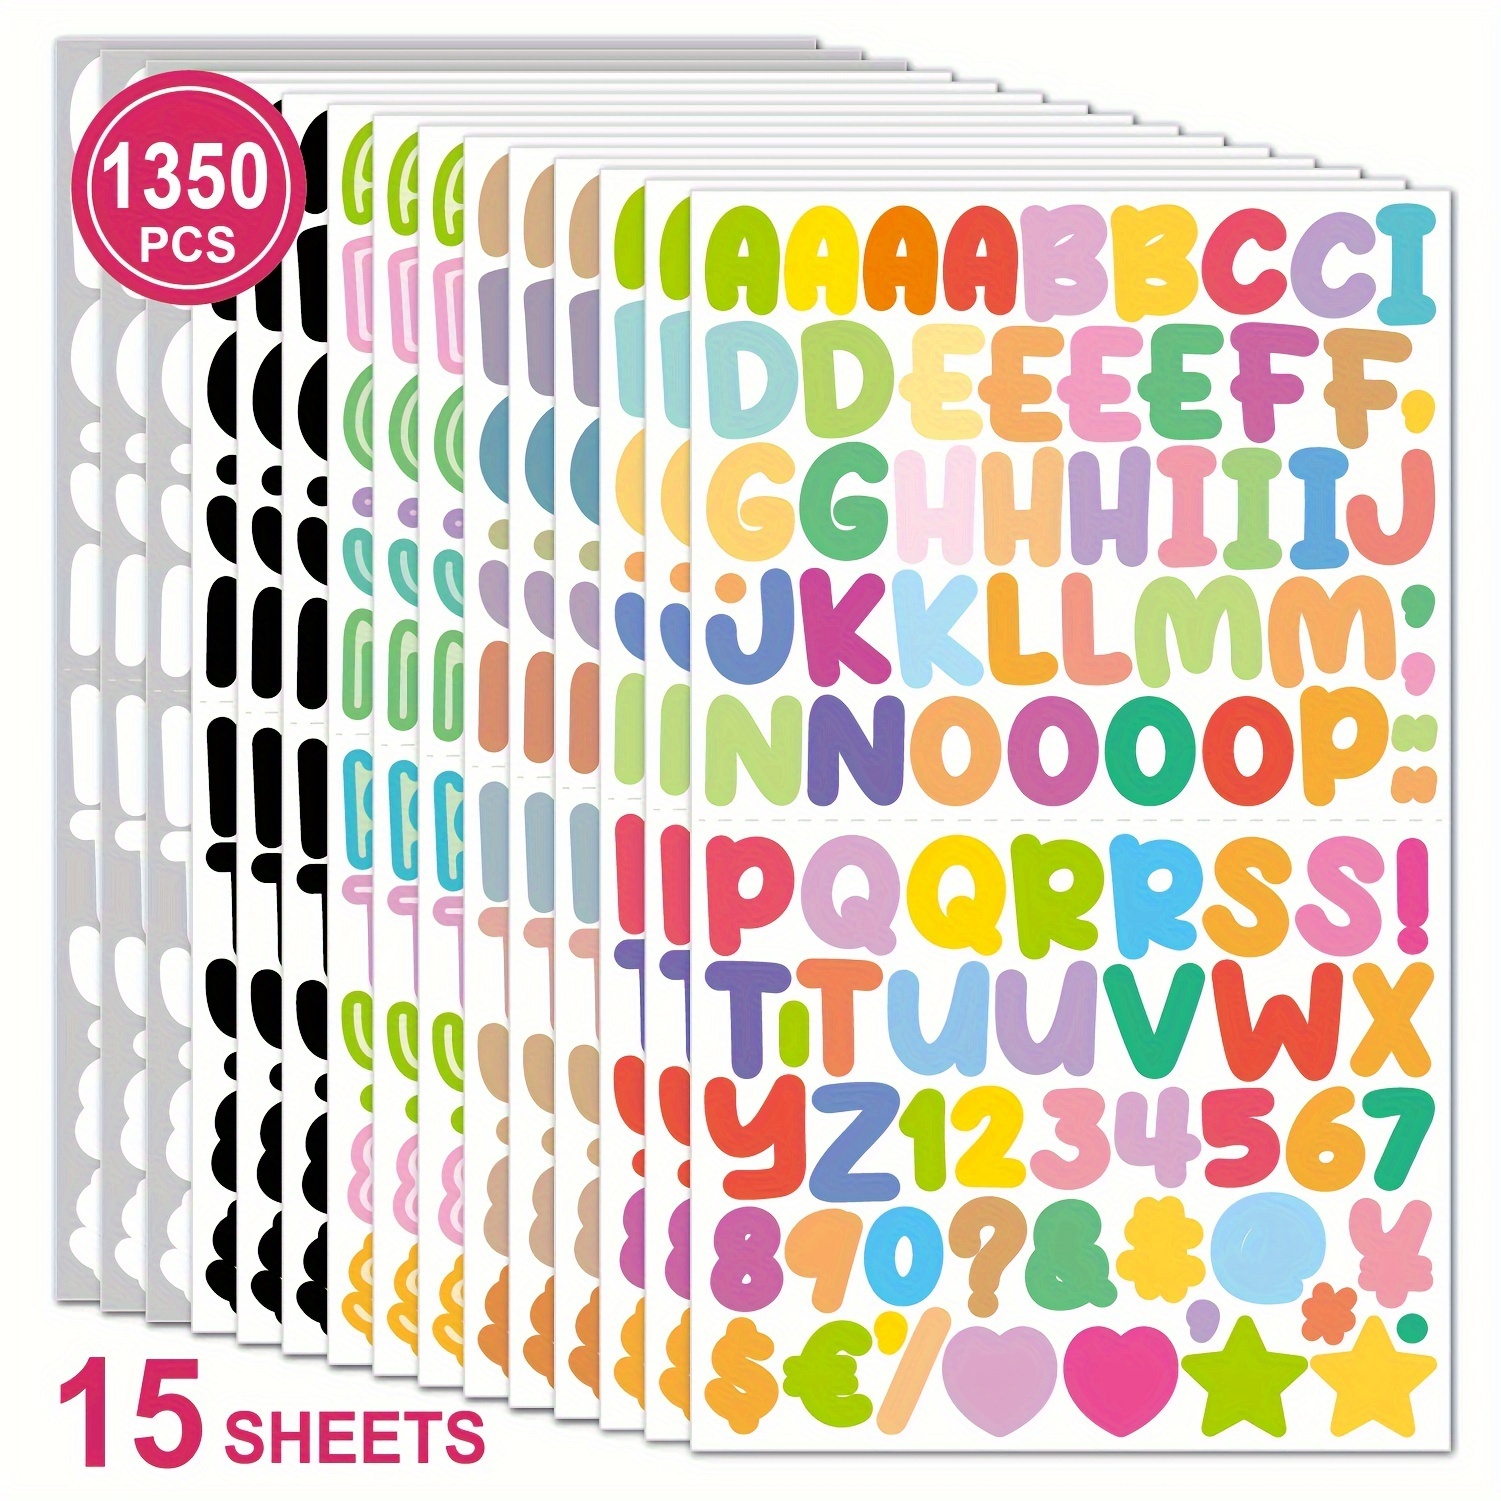 

1350 Pcs Colorful Alphabet And Number Stickers Set - Waterproof Self-adhesive Paper Labels For Scrapbooking And Decoration